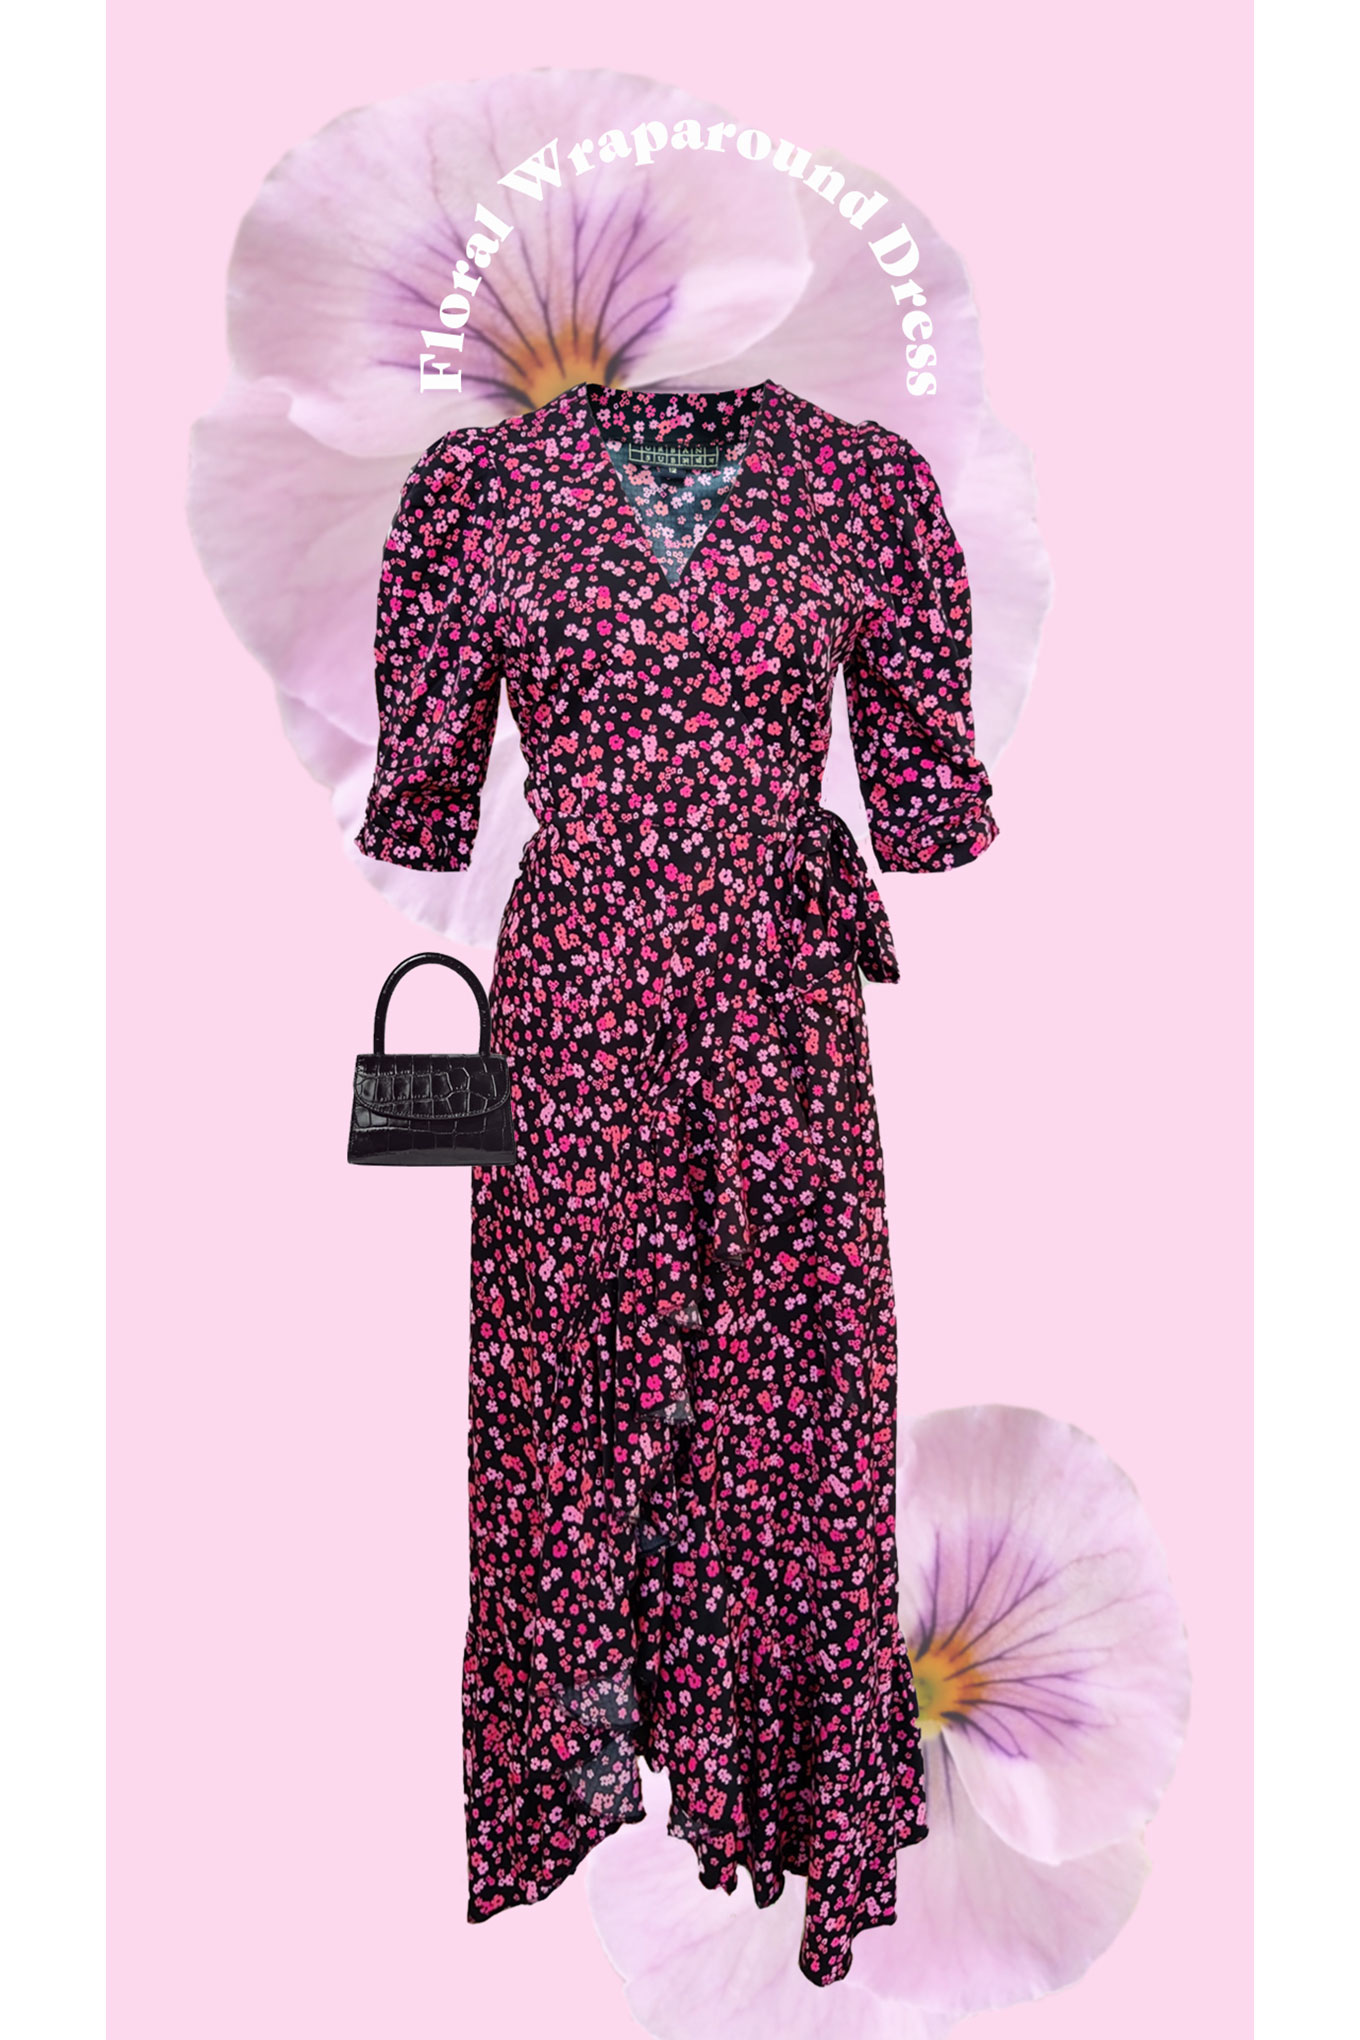 PINK AND BLACK FLORAL WRAP-AROUND DRESS